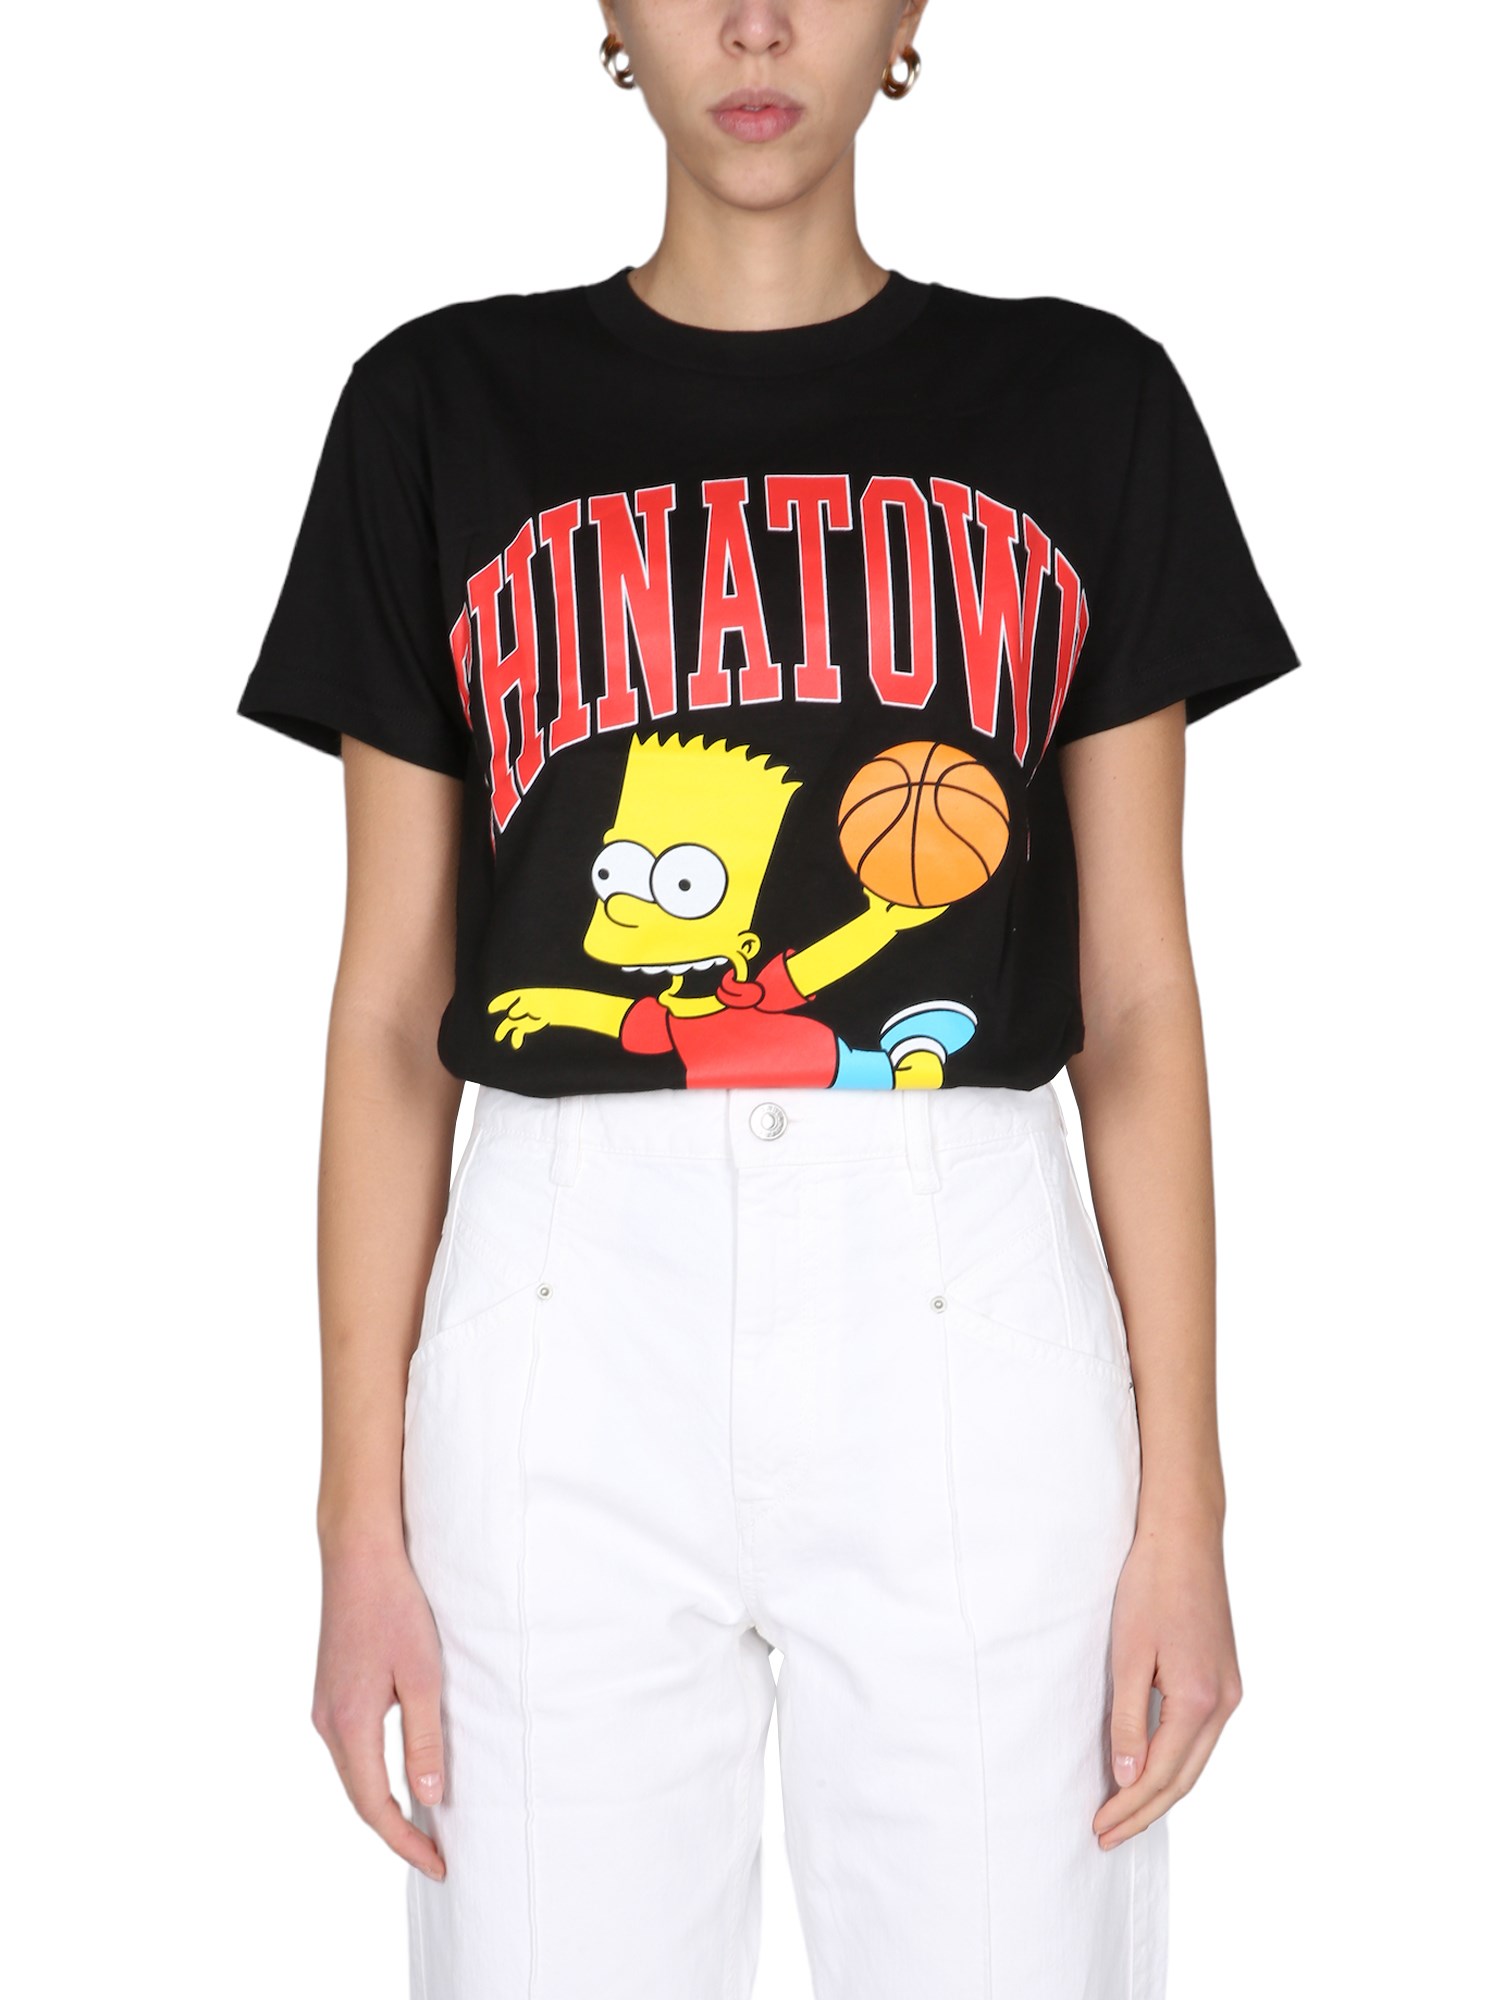 chinatown market x the simpsons 